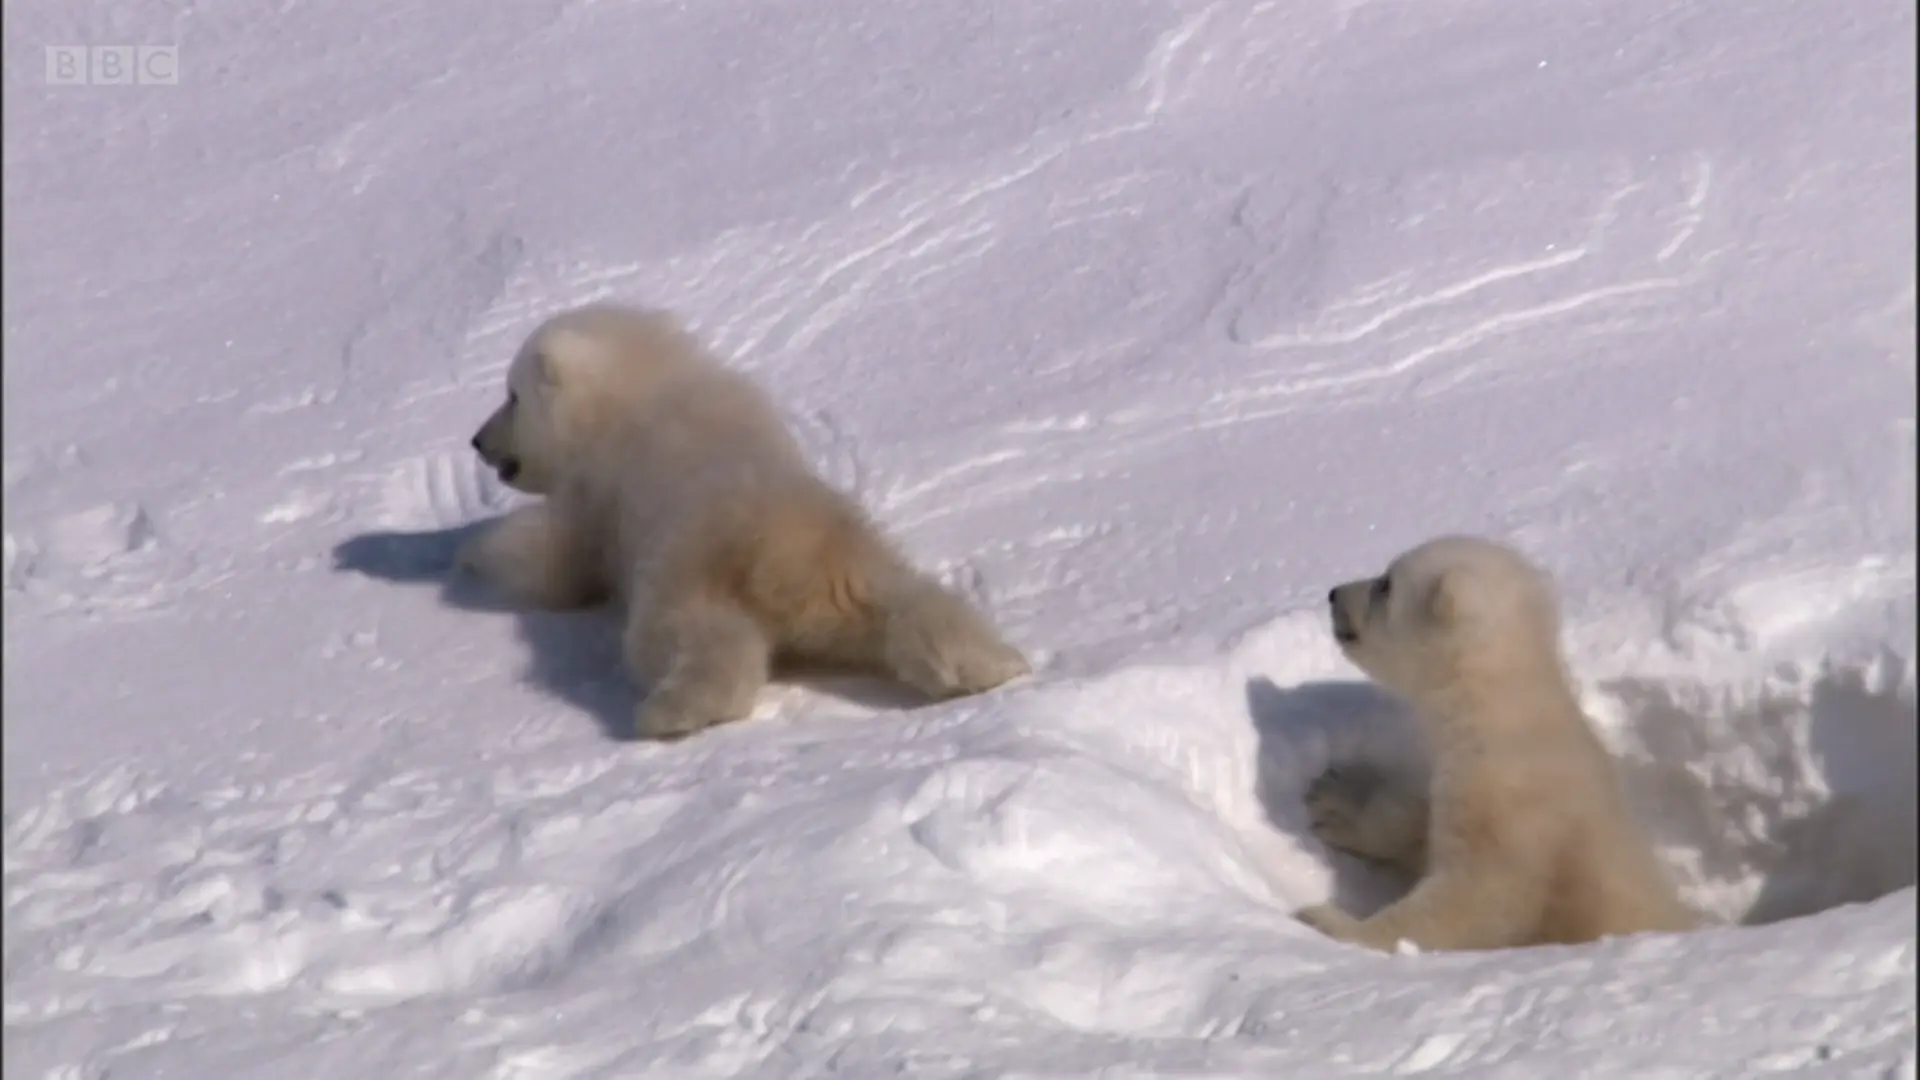 Polar bear (Ursus maritimus) as shown in Planet Earth - From Pole to Pole